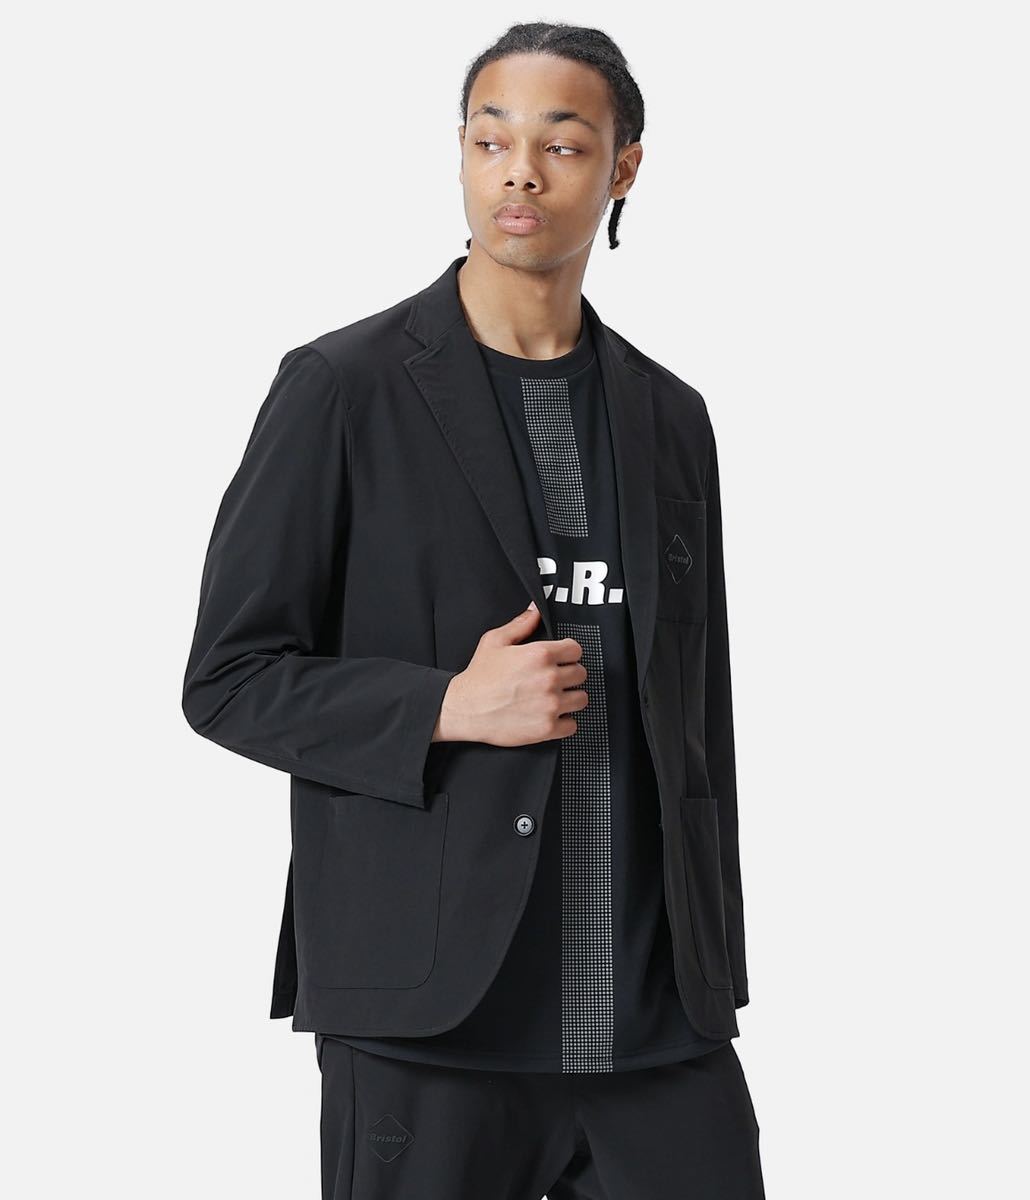 FCRB TOUR PACKABLE TEAM BLAZER S SOPH NET 22aw